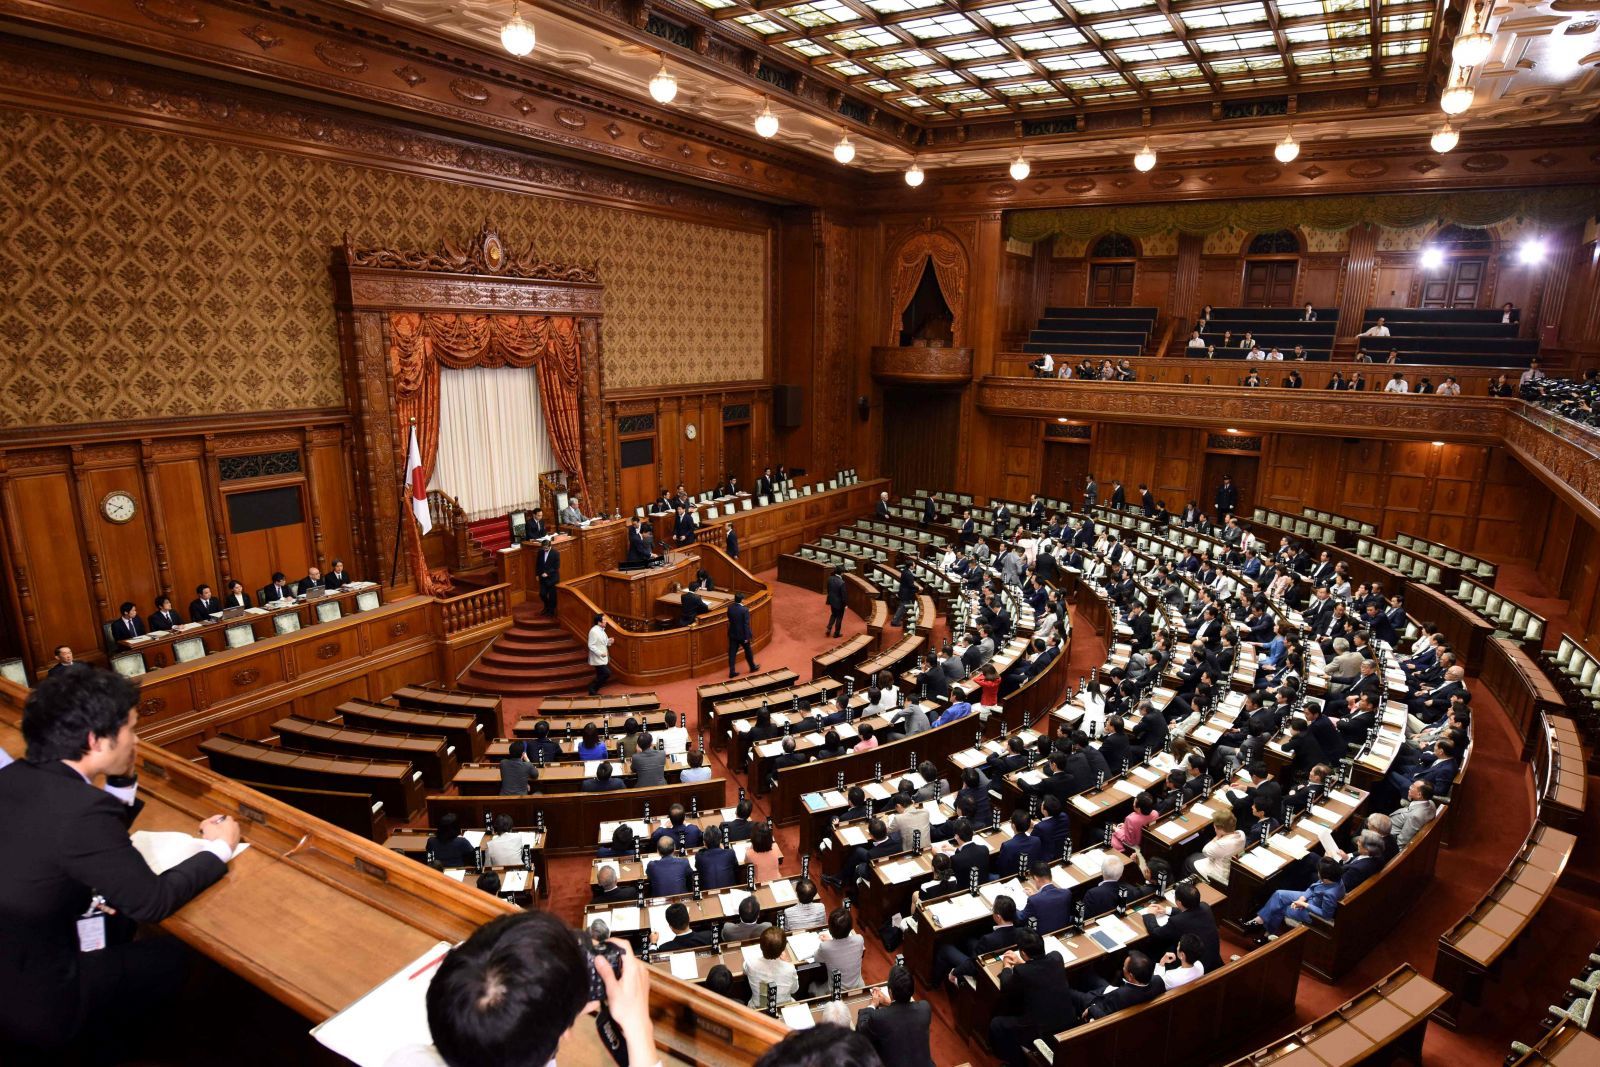 PRESS RELEASE: WUC WELCOMES RESOLUTION IN JAPANESE PARLIAMENT ON UYGHUR HUMAN RIGHTS CRISIS